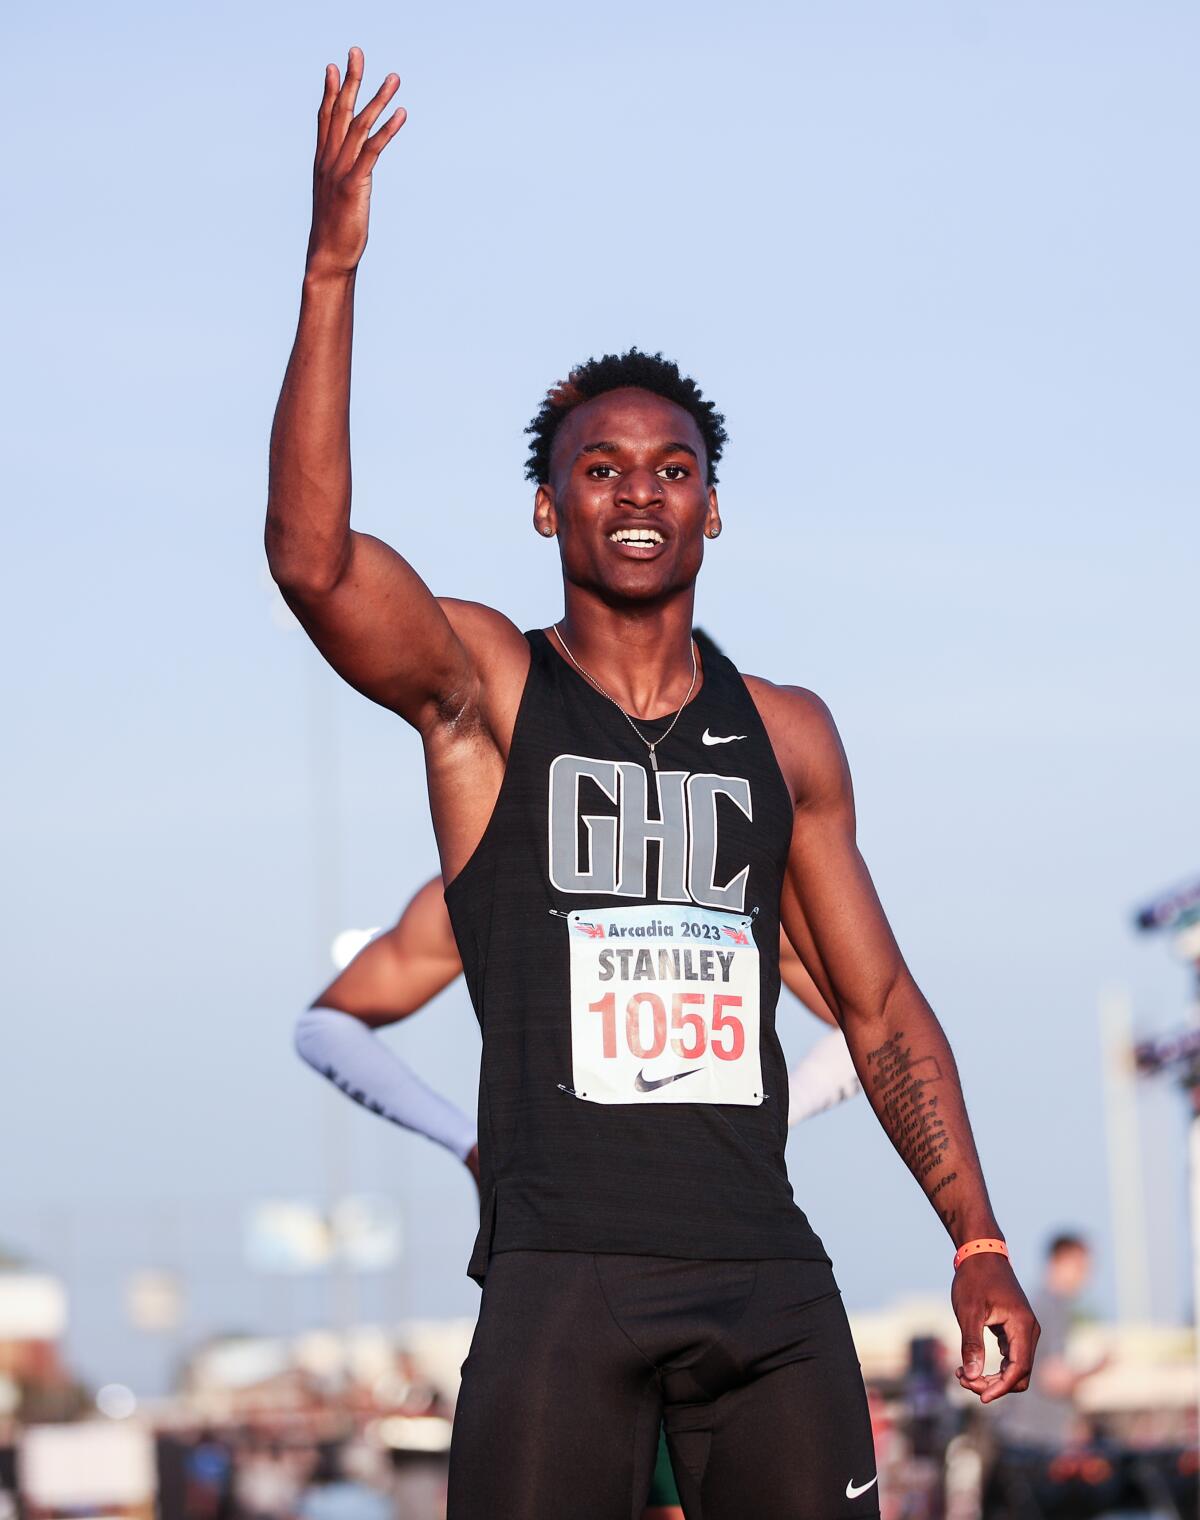 Dijon Stanley of Granada Hills turned in the top performance of the Arcadia Invitational.